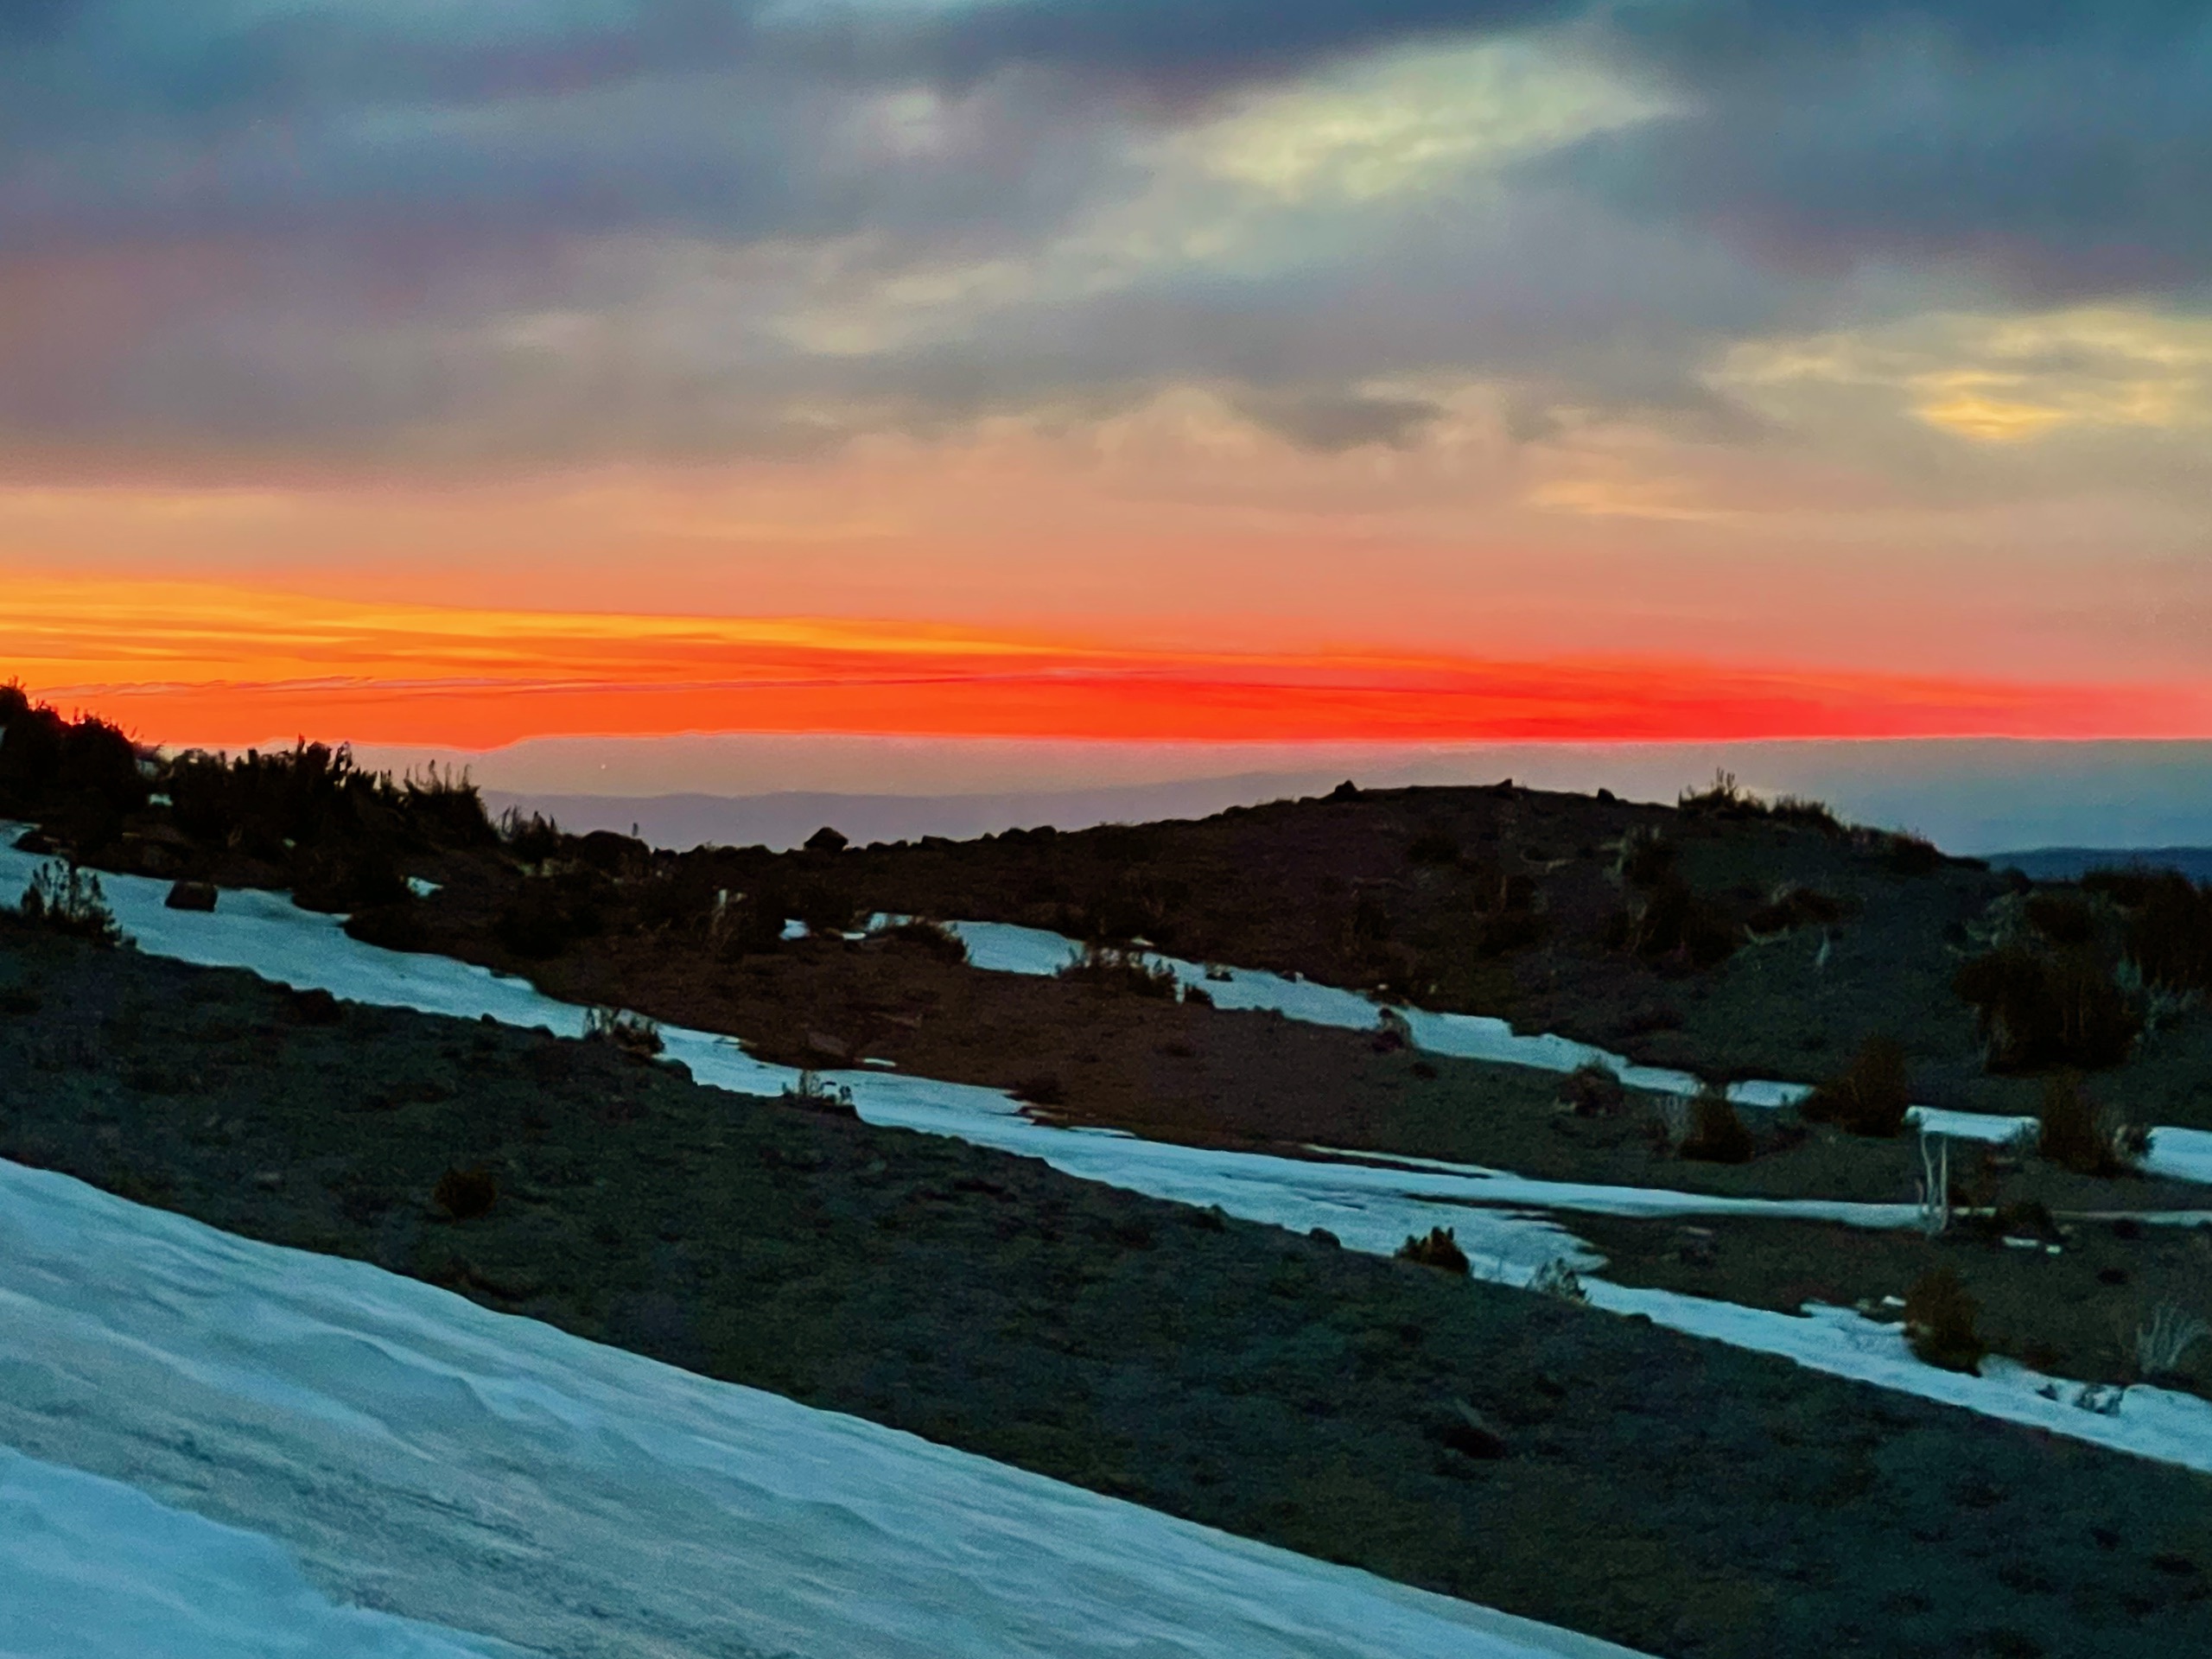 Sunrise over the eastern Oregon foothills. Patchy snow fields cover the volcanic shoulders in the foreground.